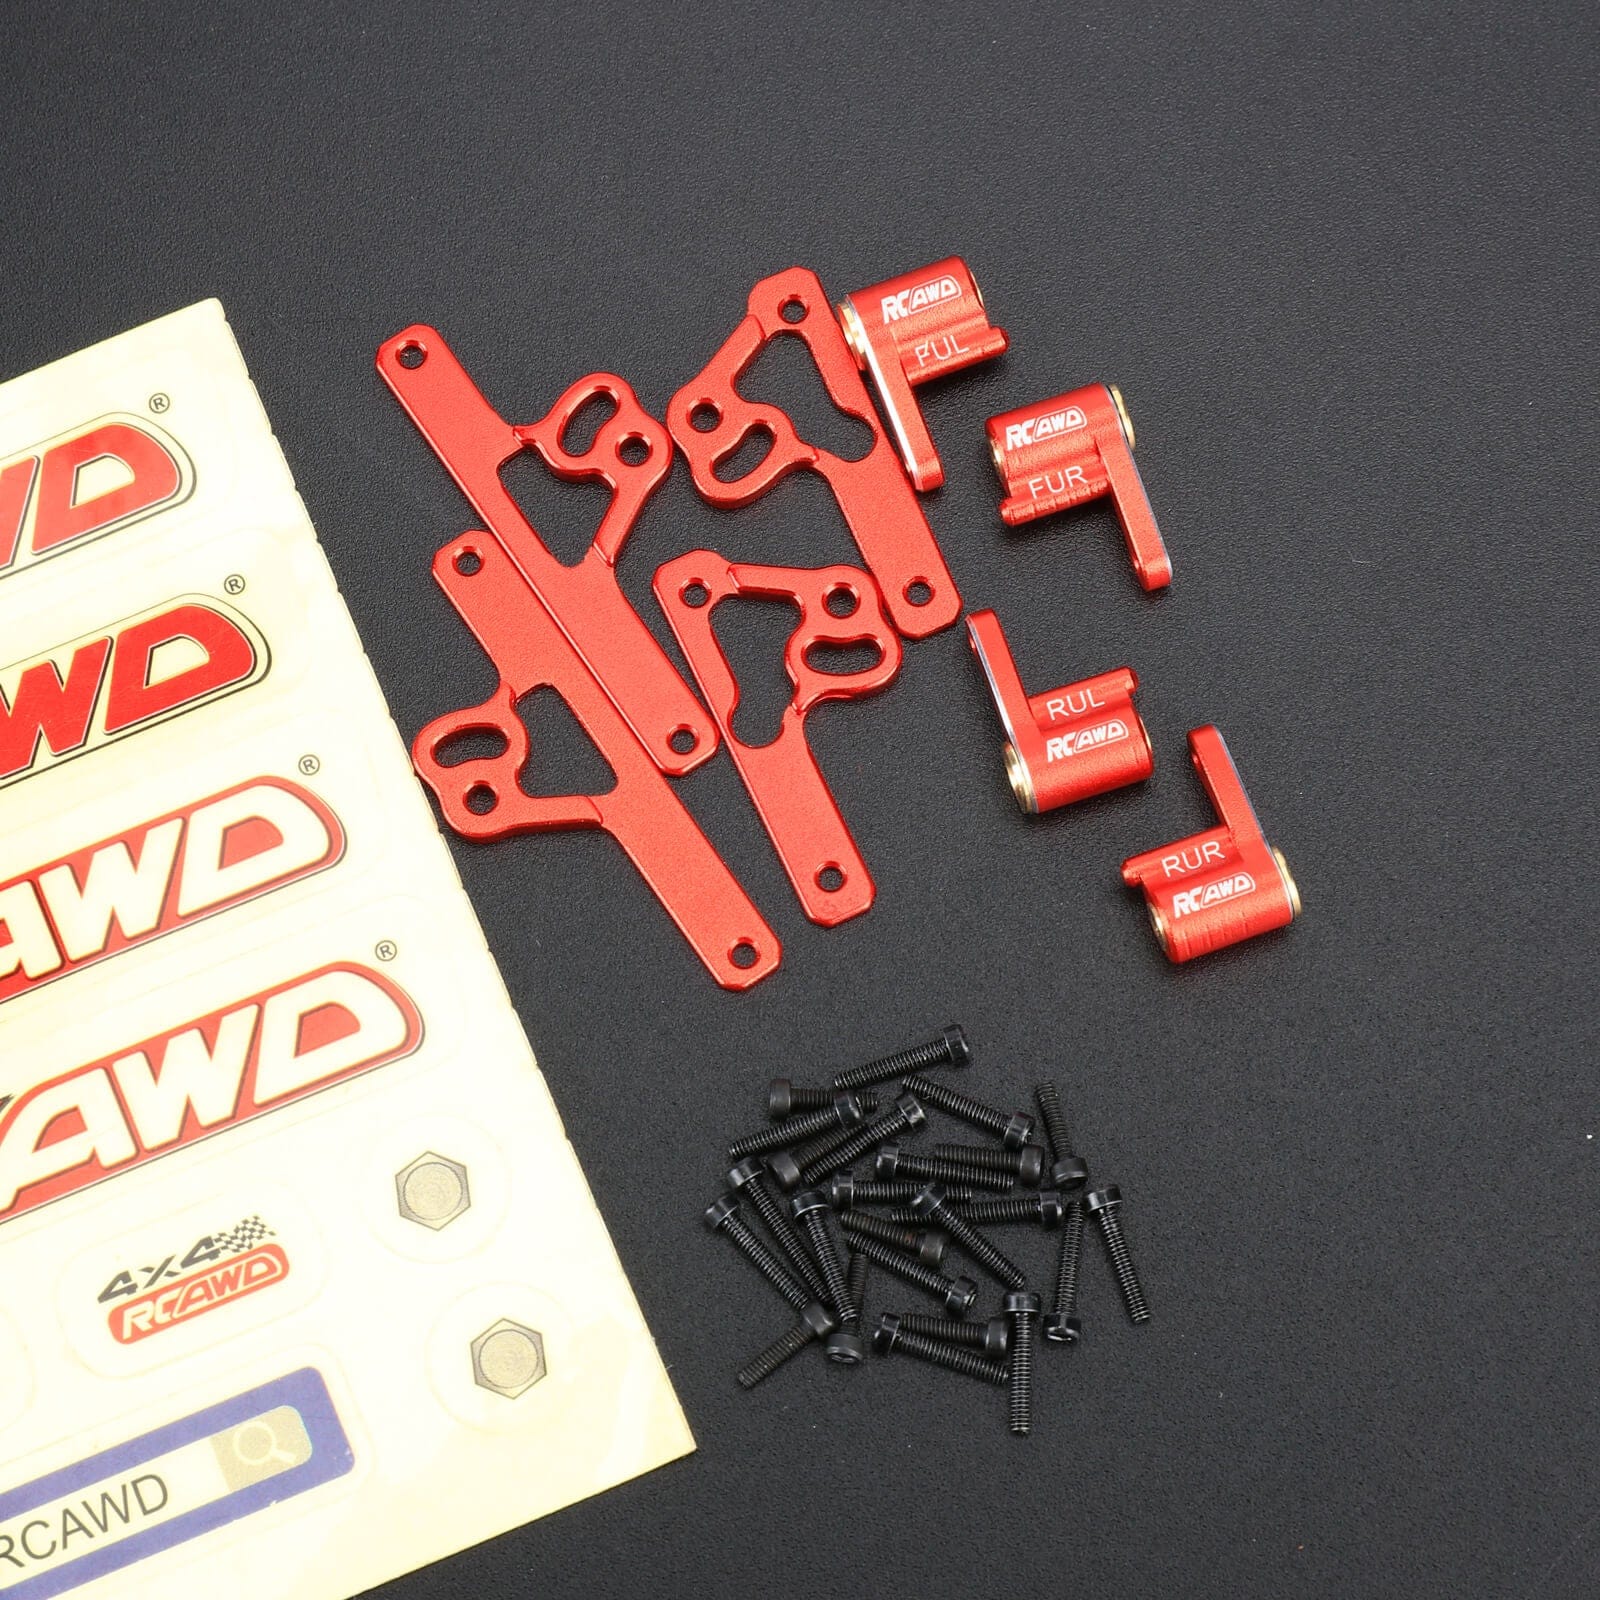 RCAWD AXIAL SCX24 Red / Only Damper Holder Absorber Mount RCAWD Axial SCX24 Upgrades Aluminum Damper Holder Absorber Mount & Shocks Complete Set for 1/24 RC Crawler